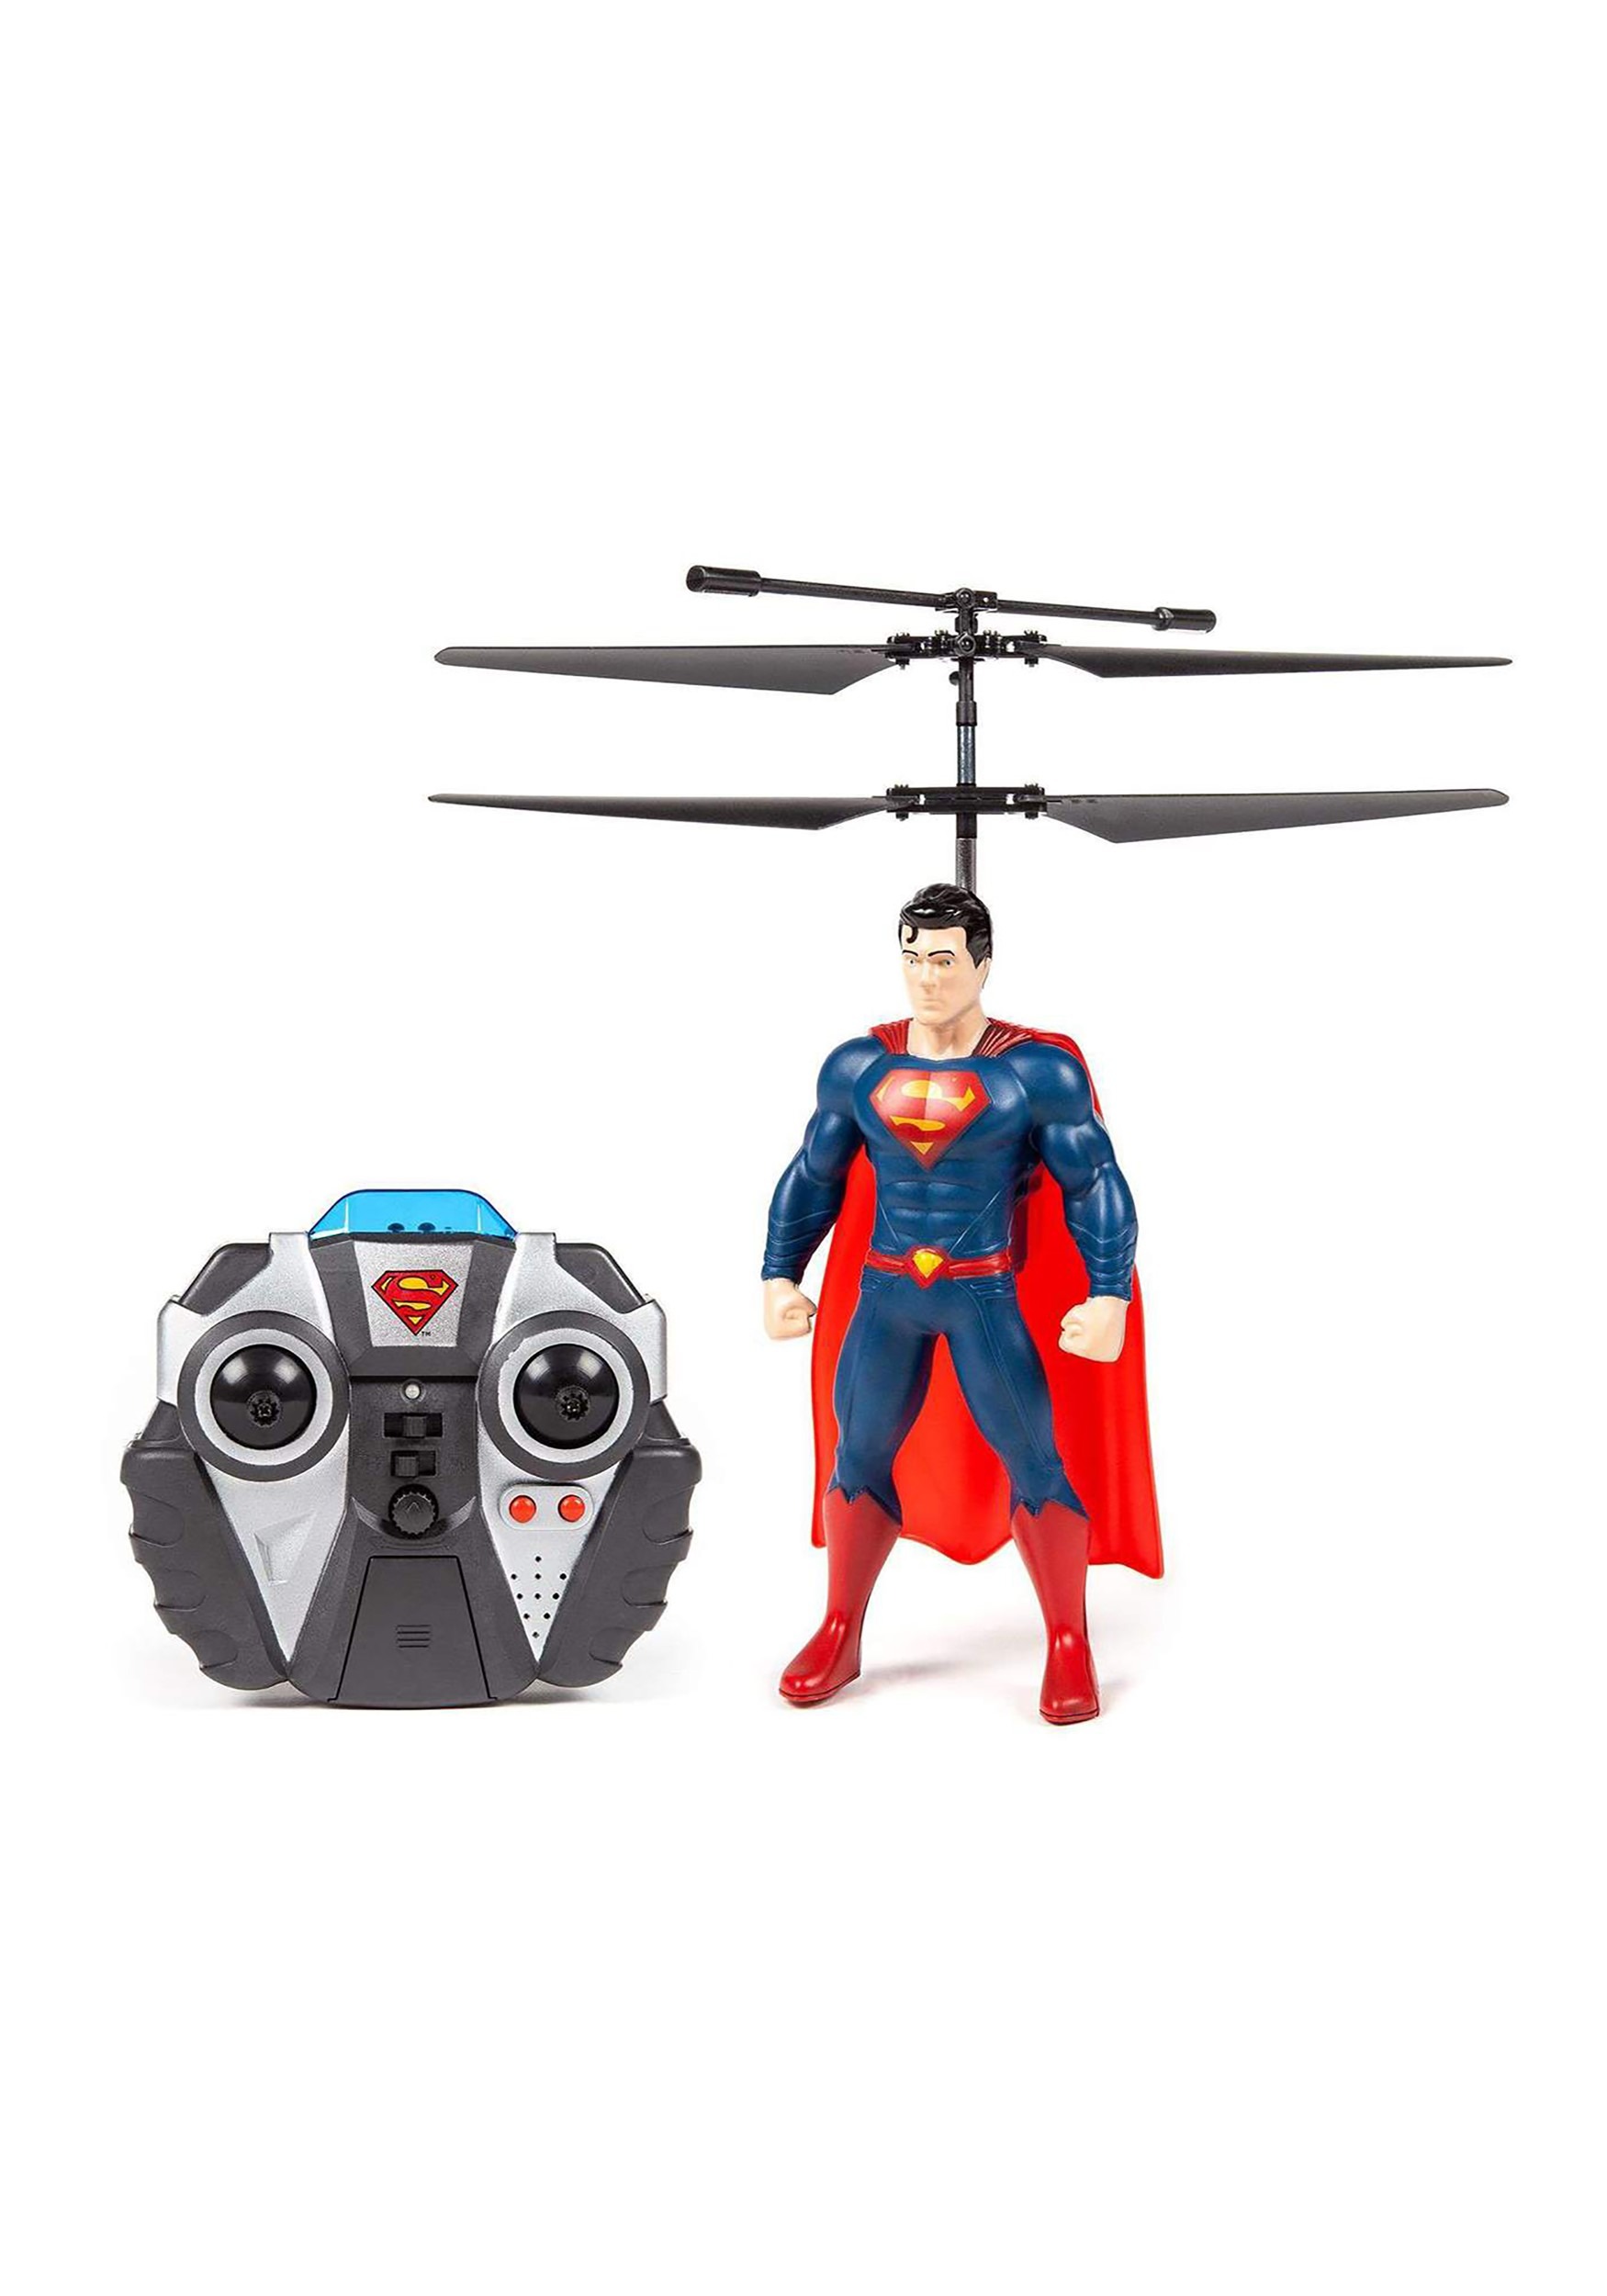 Flying Superman 2CH IR Figure Helicopter